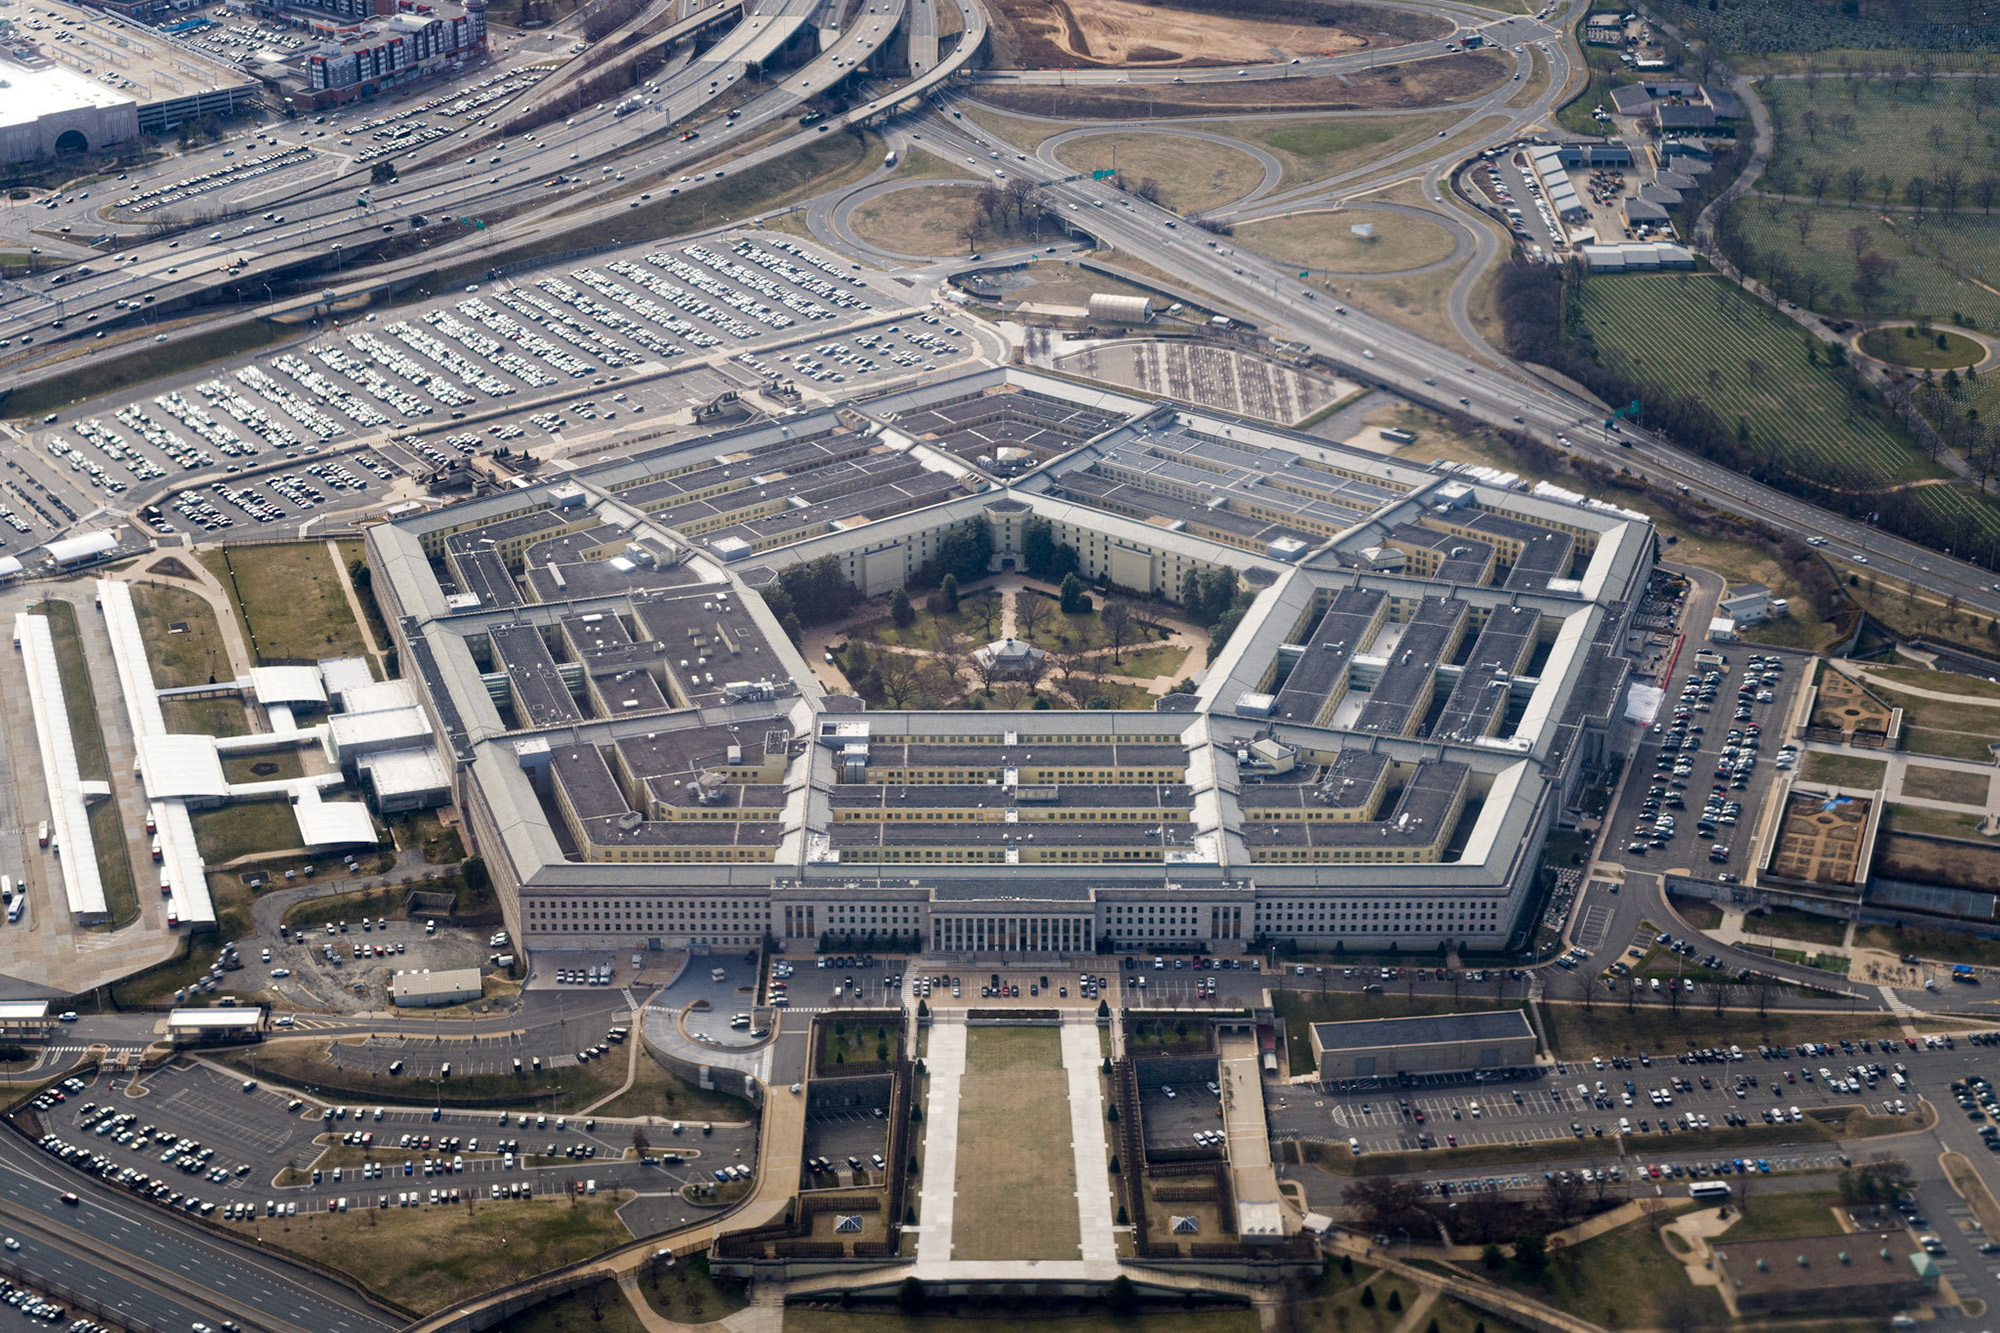 The Pentagon from the air in Arlington, Virginia, on March 3, 2022.